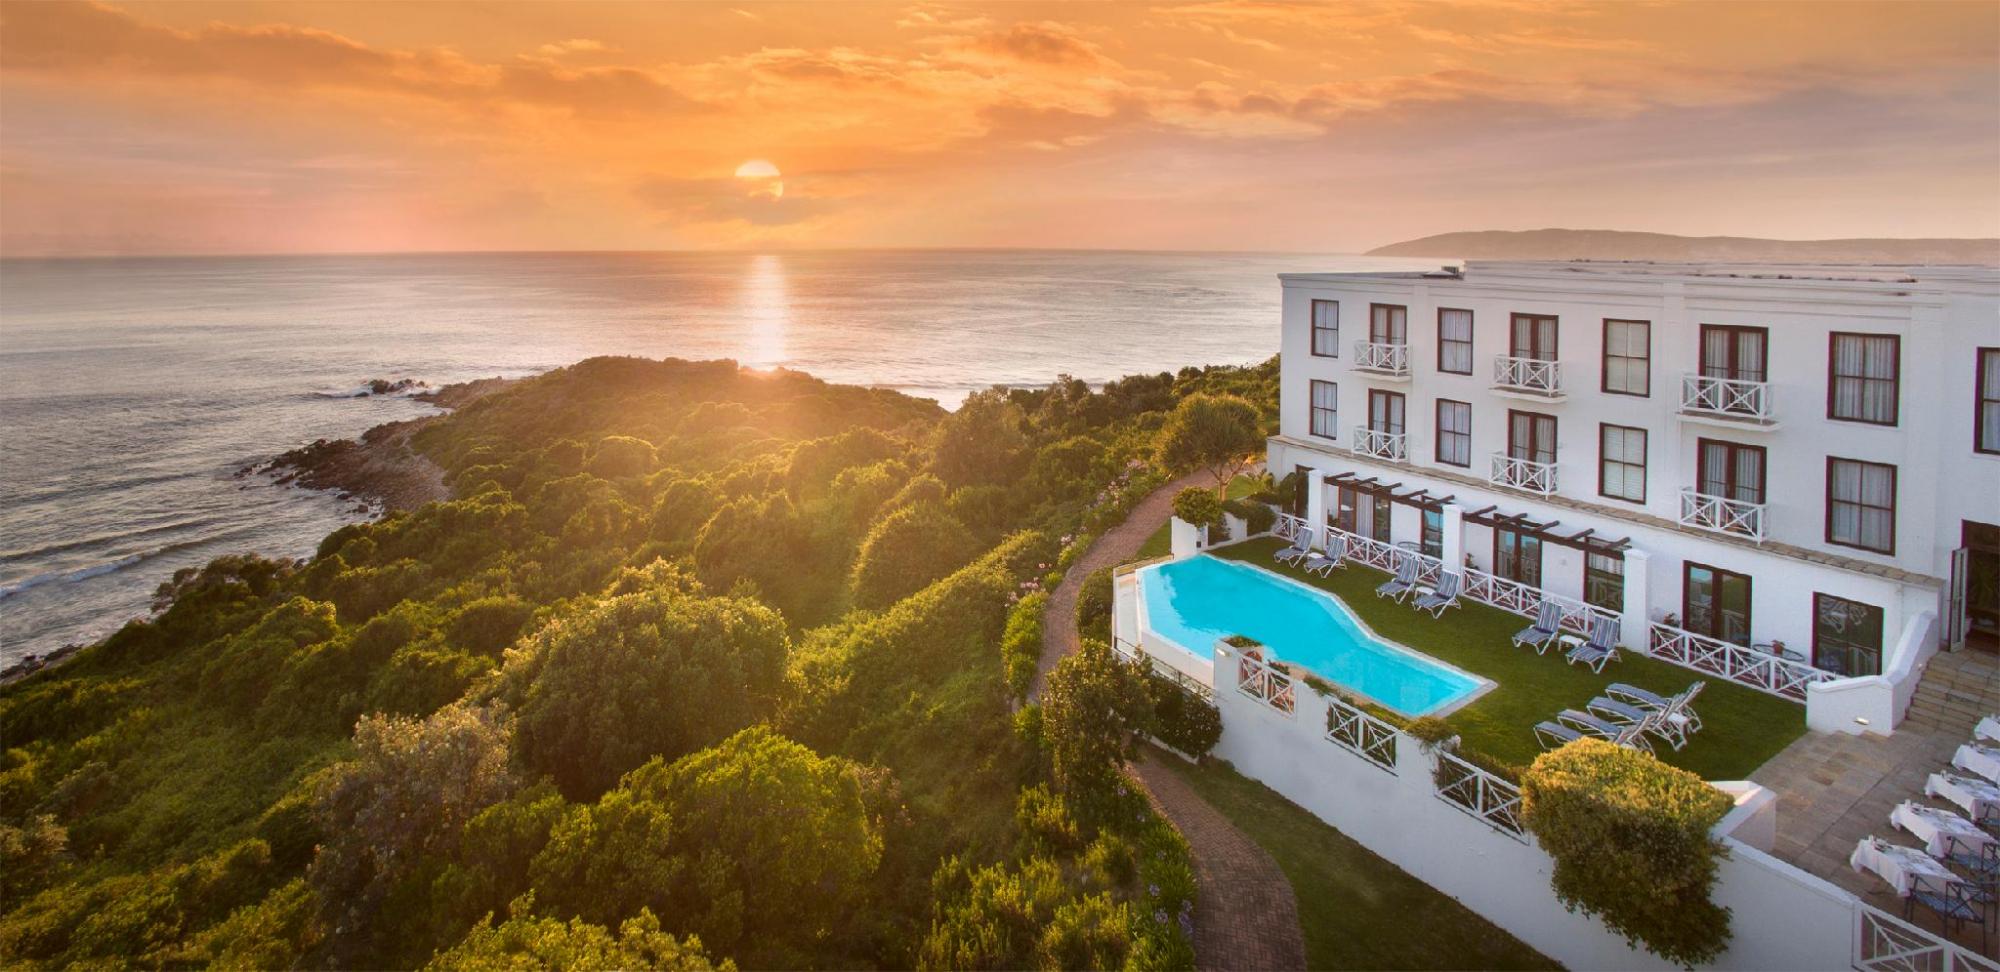 The Plettenberg Hotel's scenic sunset over the hotel situated in dazzling South Africa.